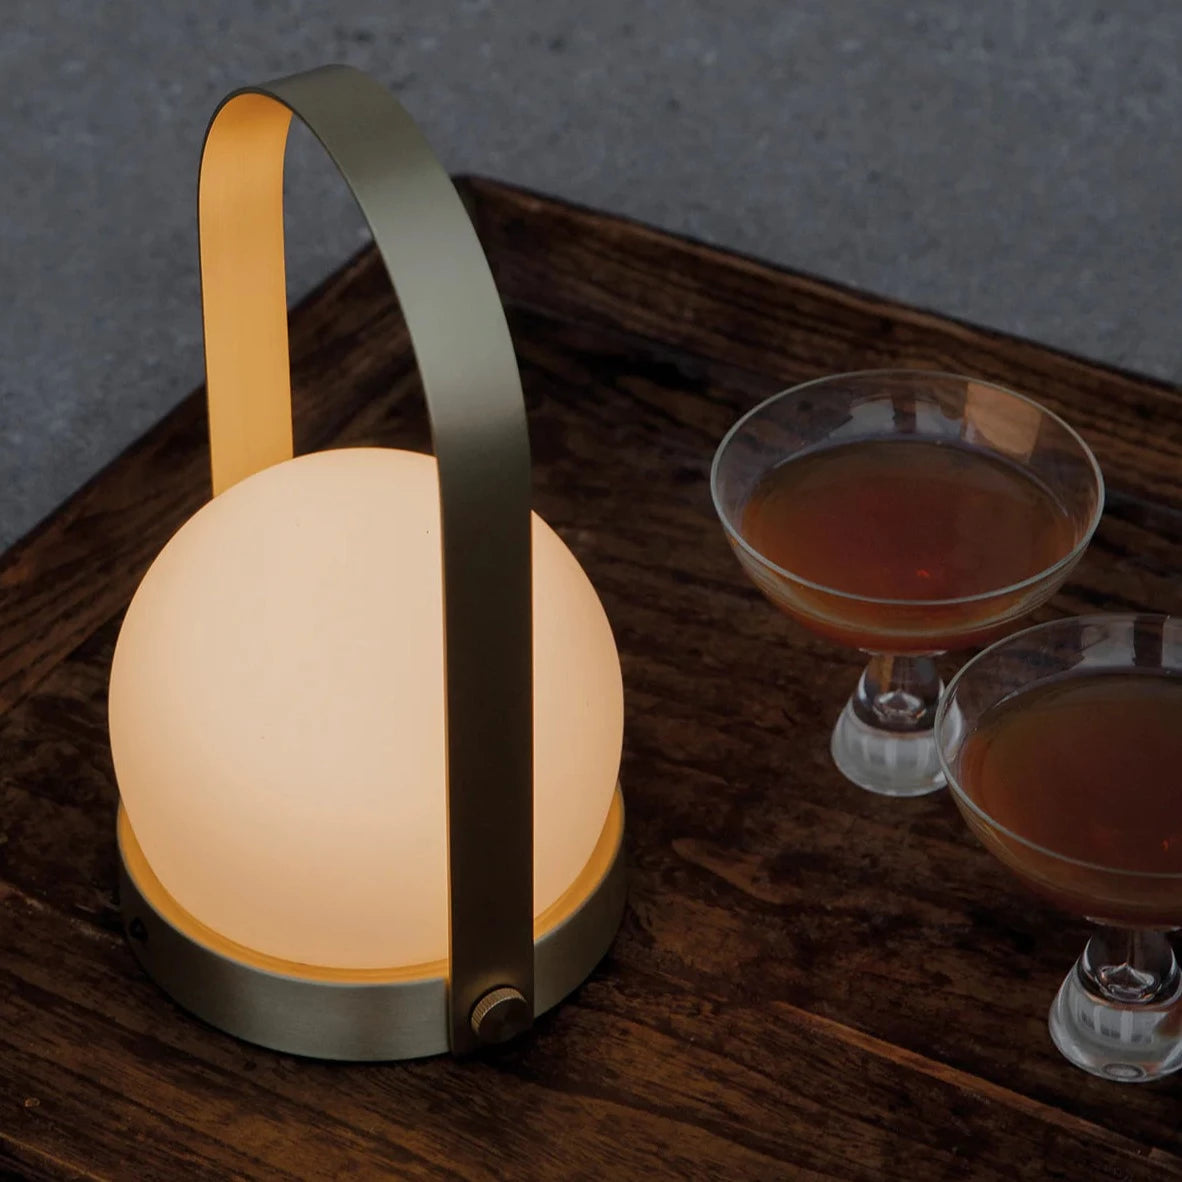 Carrie LED Lamp - Brushed Brass